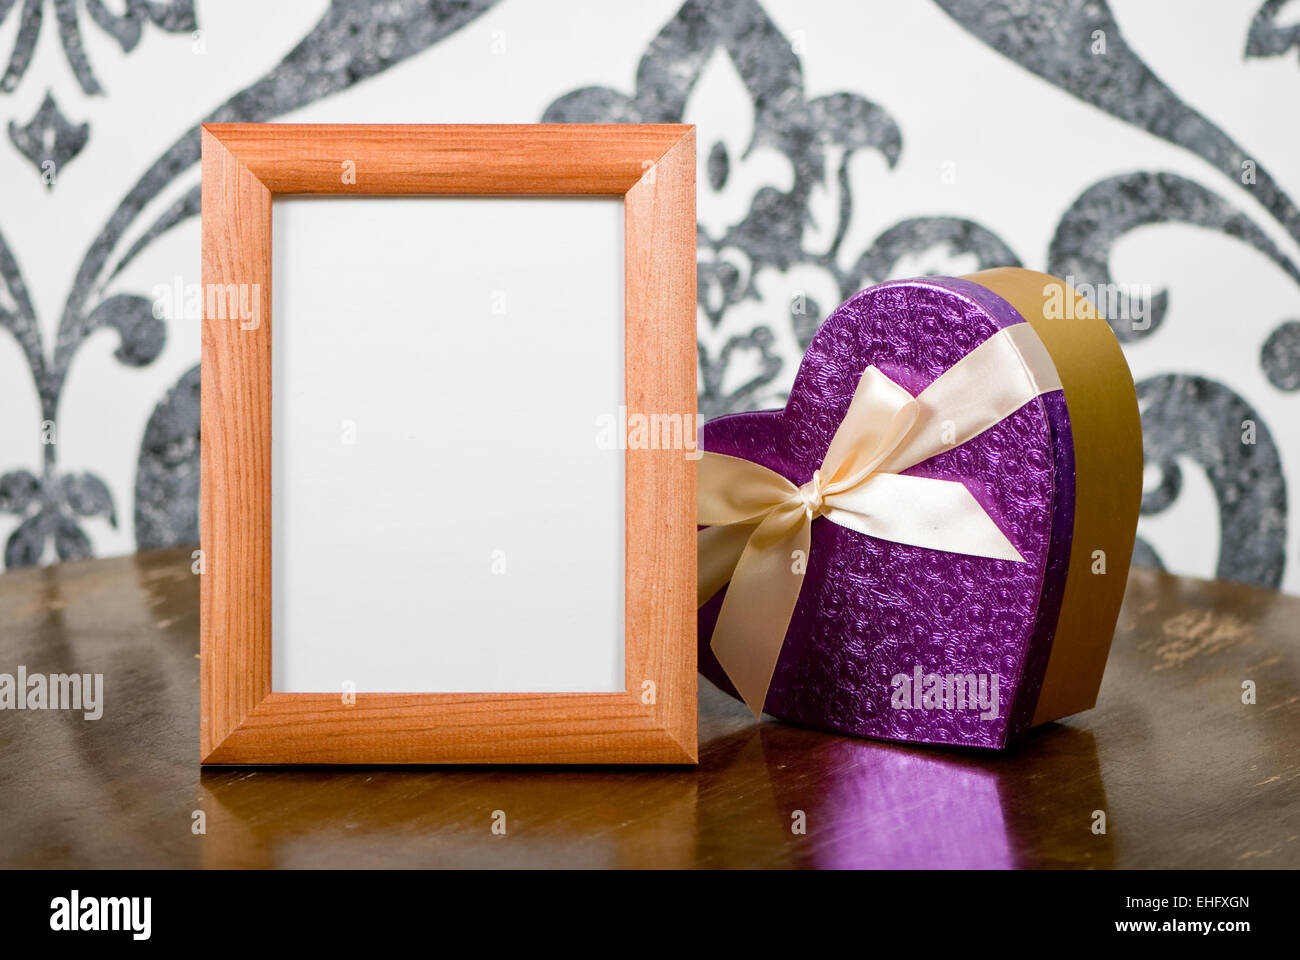 Wooden photo frame and present box on table Stock Photo